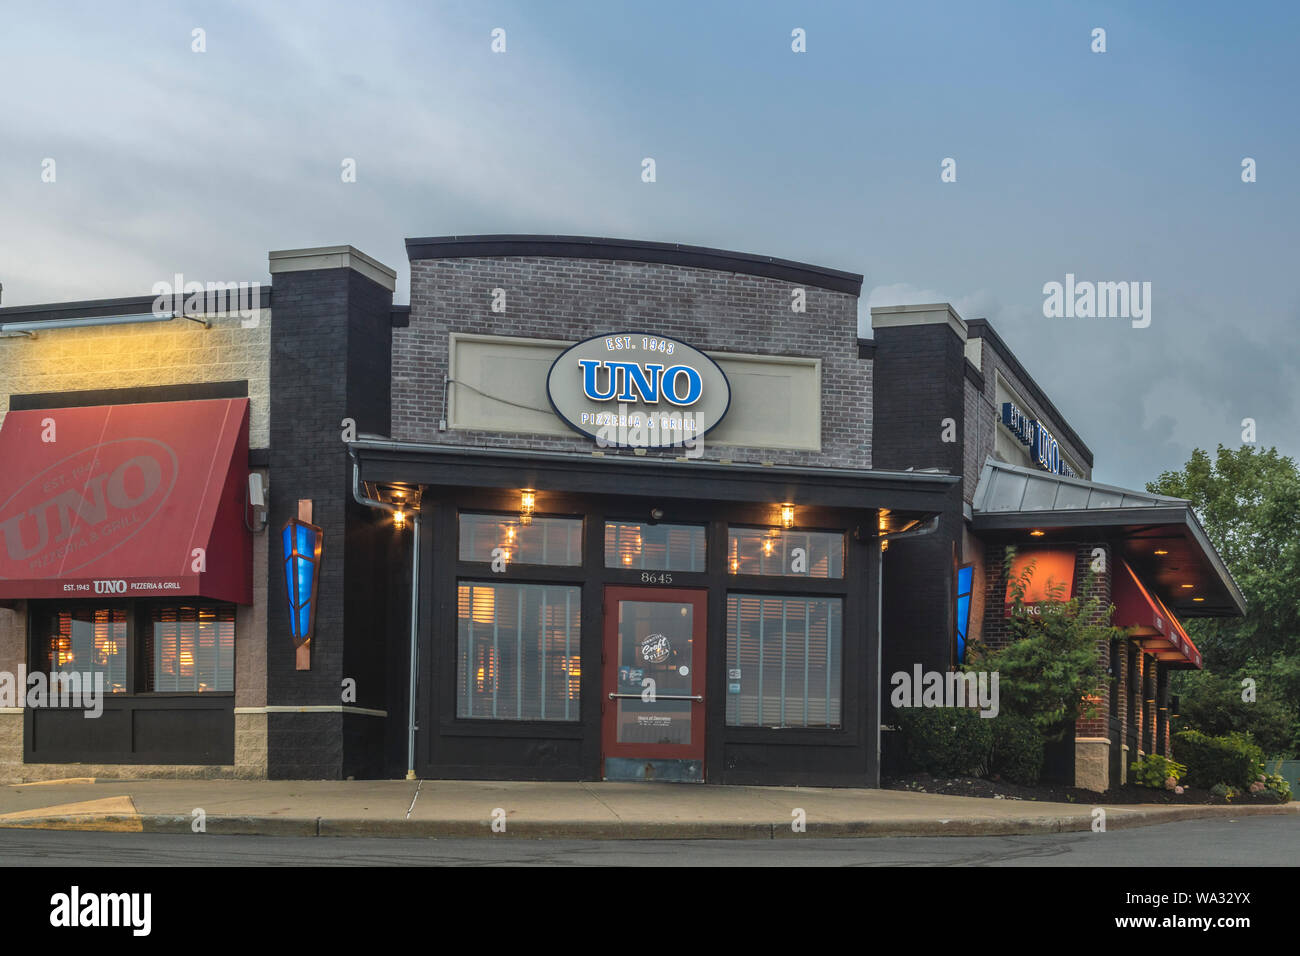 NEW HARTFORD, NEW YORK - AUG 16, 2019: Uno Pizzeria & Grill (formerly Pizzeria Uno and Uno Chicago Grill), or more informally as Unos, is a franchised Stock Photo